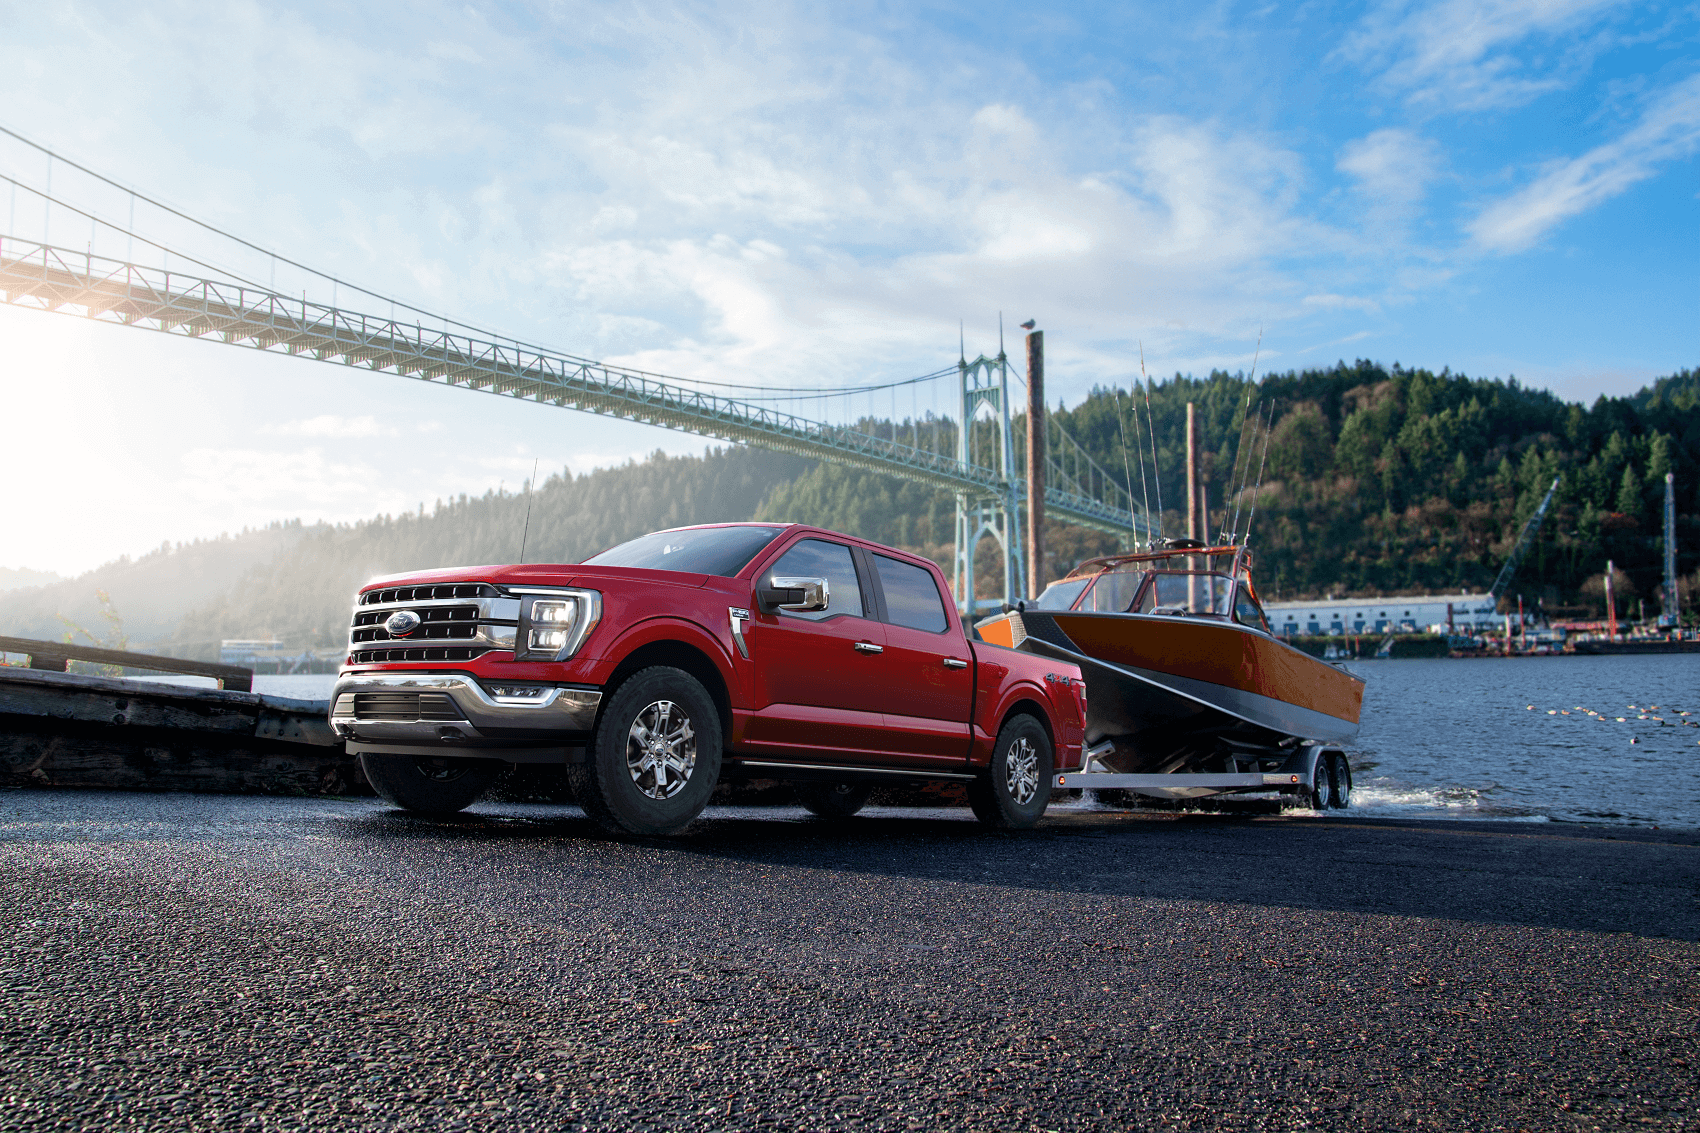 A new red 2021 Ford F-150 hauling a boat out of the water with a bridge in the background.